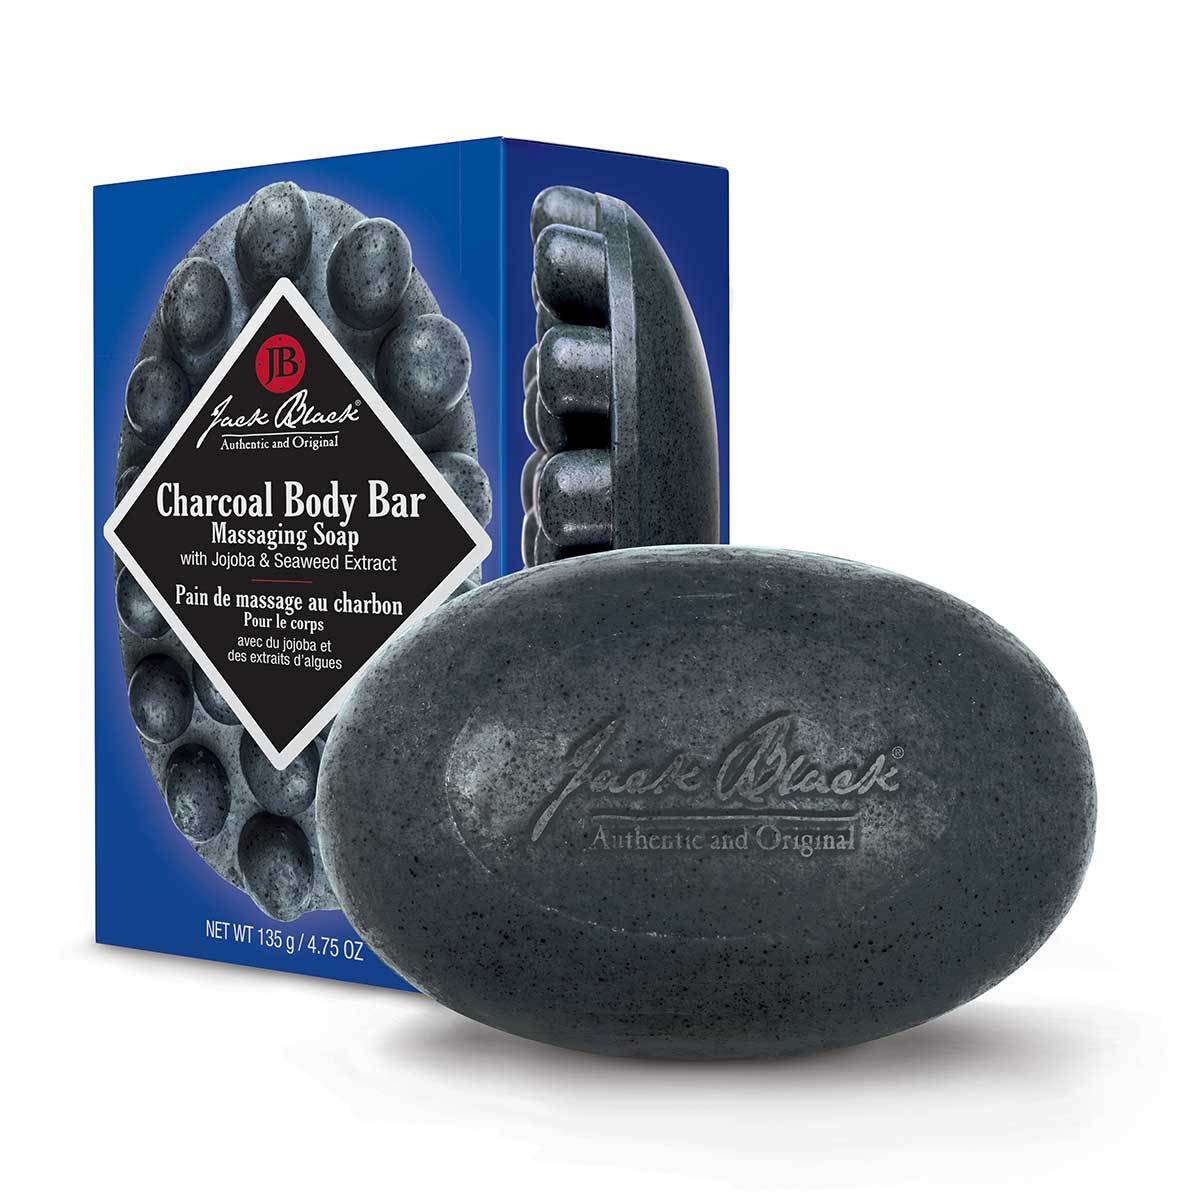 Primary image of Charcoal Body Bar Massaging Soap